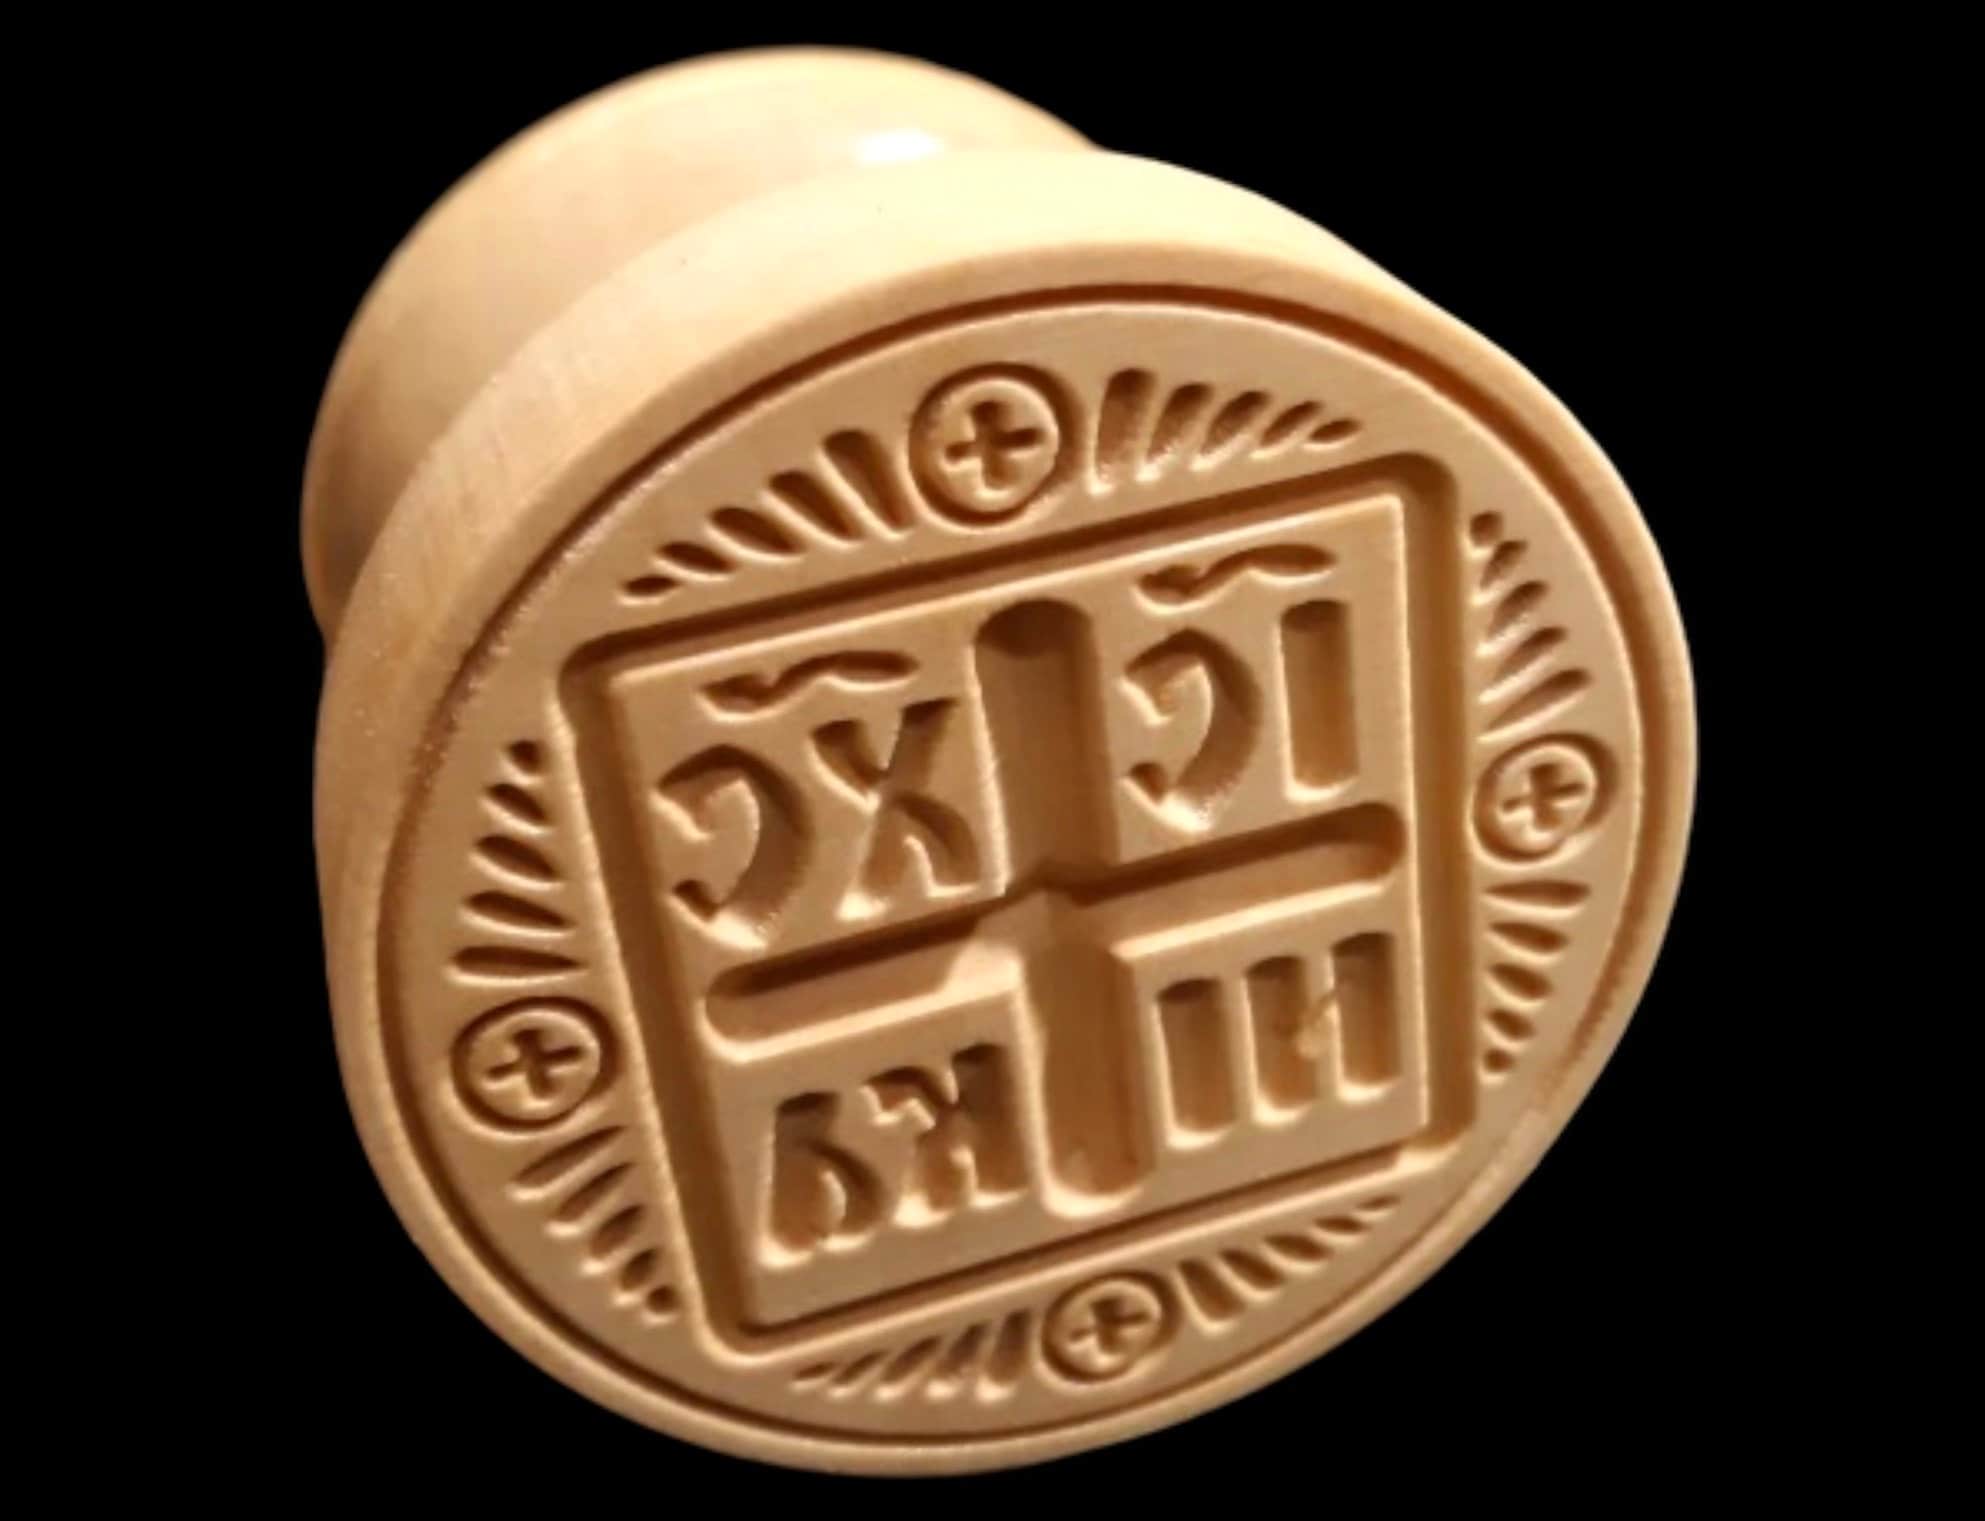 Hand Crafted Wooden Bread Stamp 6cm across $35.99 Free Shipping